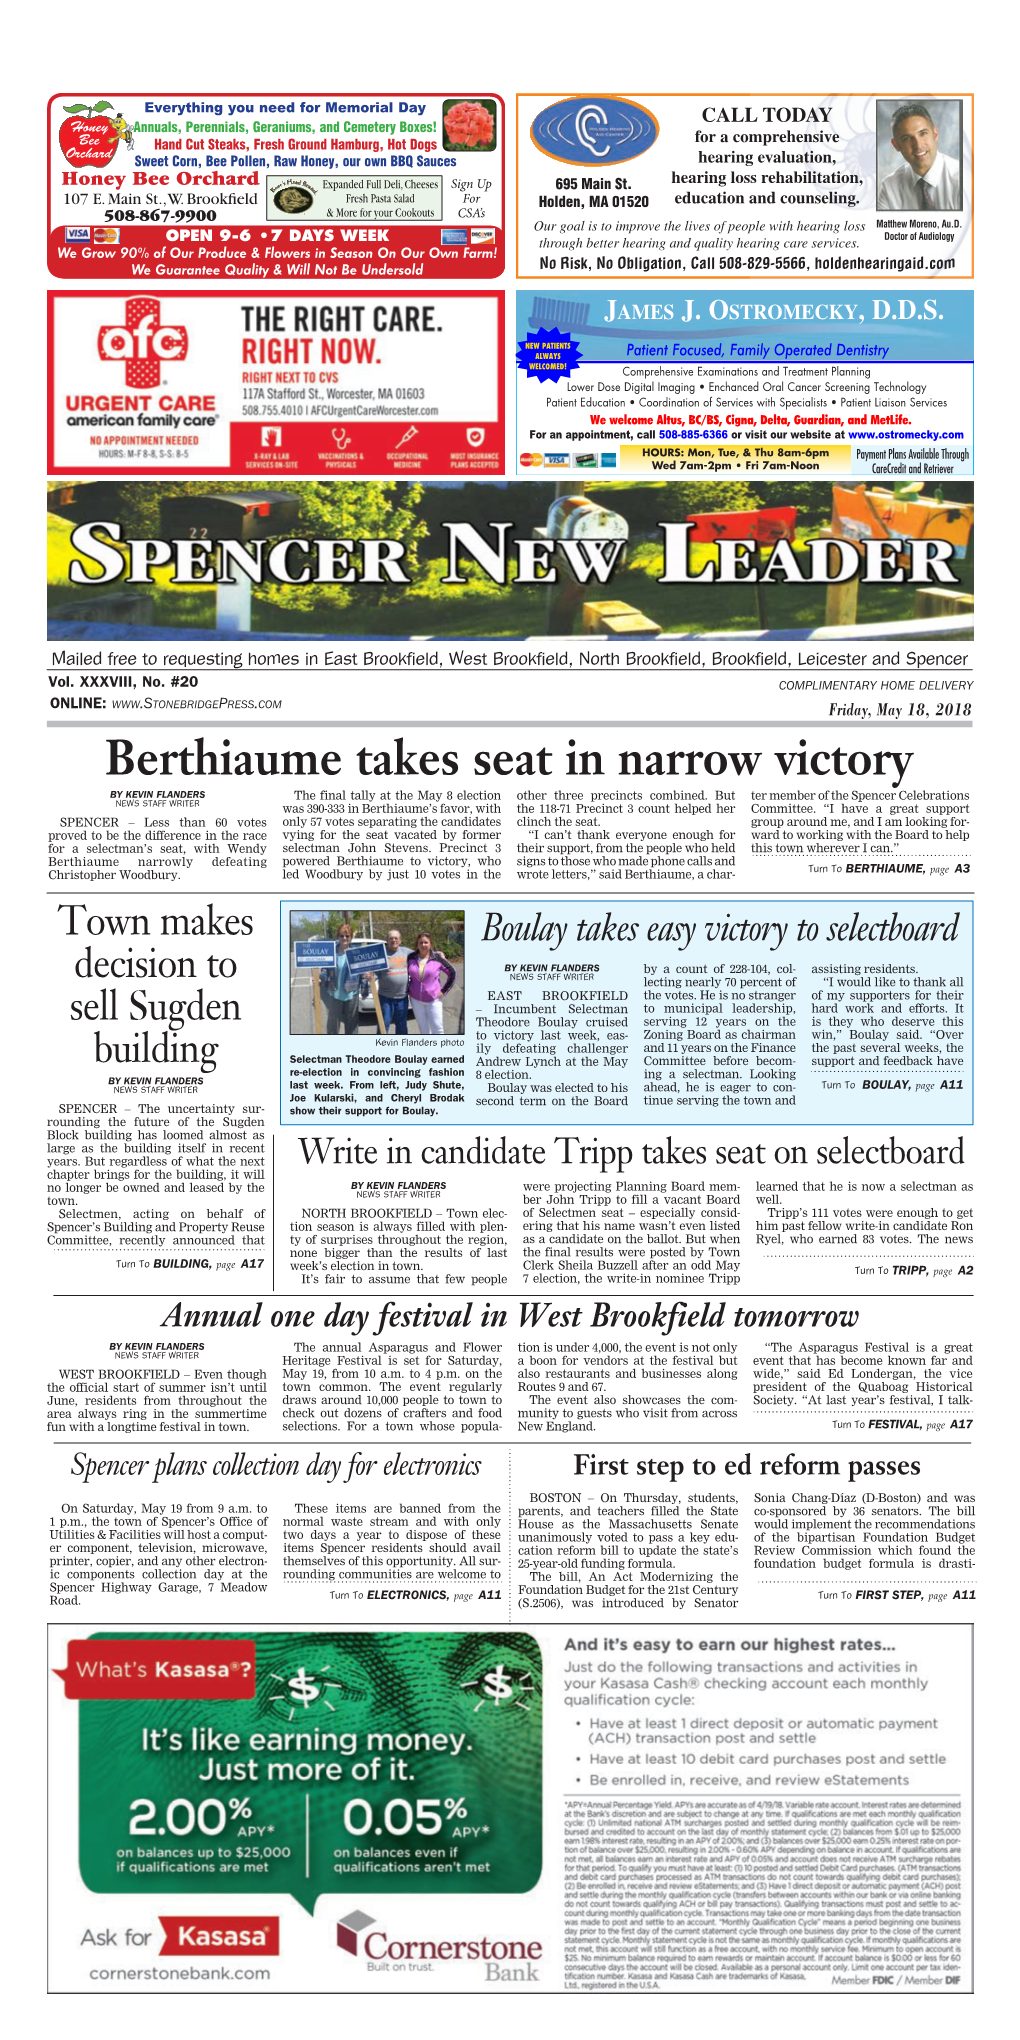 Berthiaume Takes Seat in Narrow Victory by KEVIN FLANDERS the Final Tally at the May 8 Election Other Three Precincts Combined